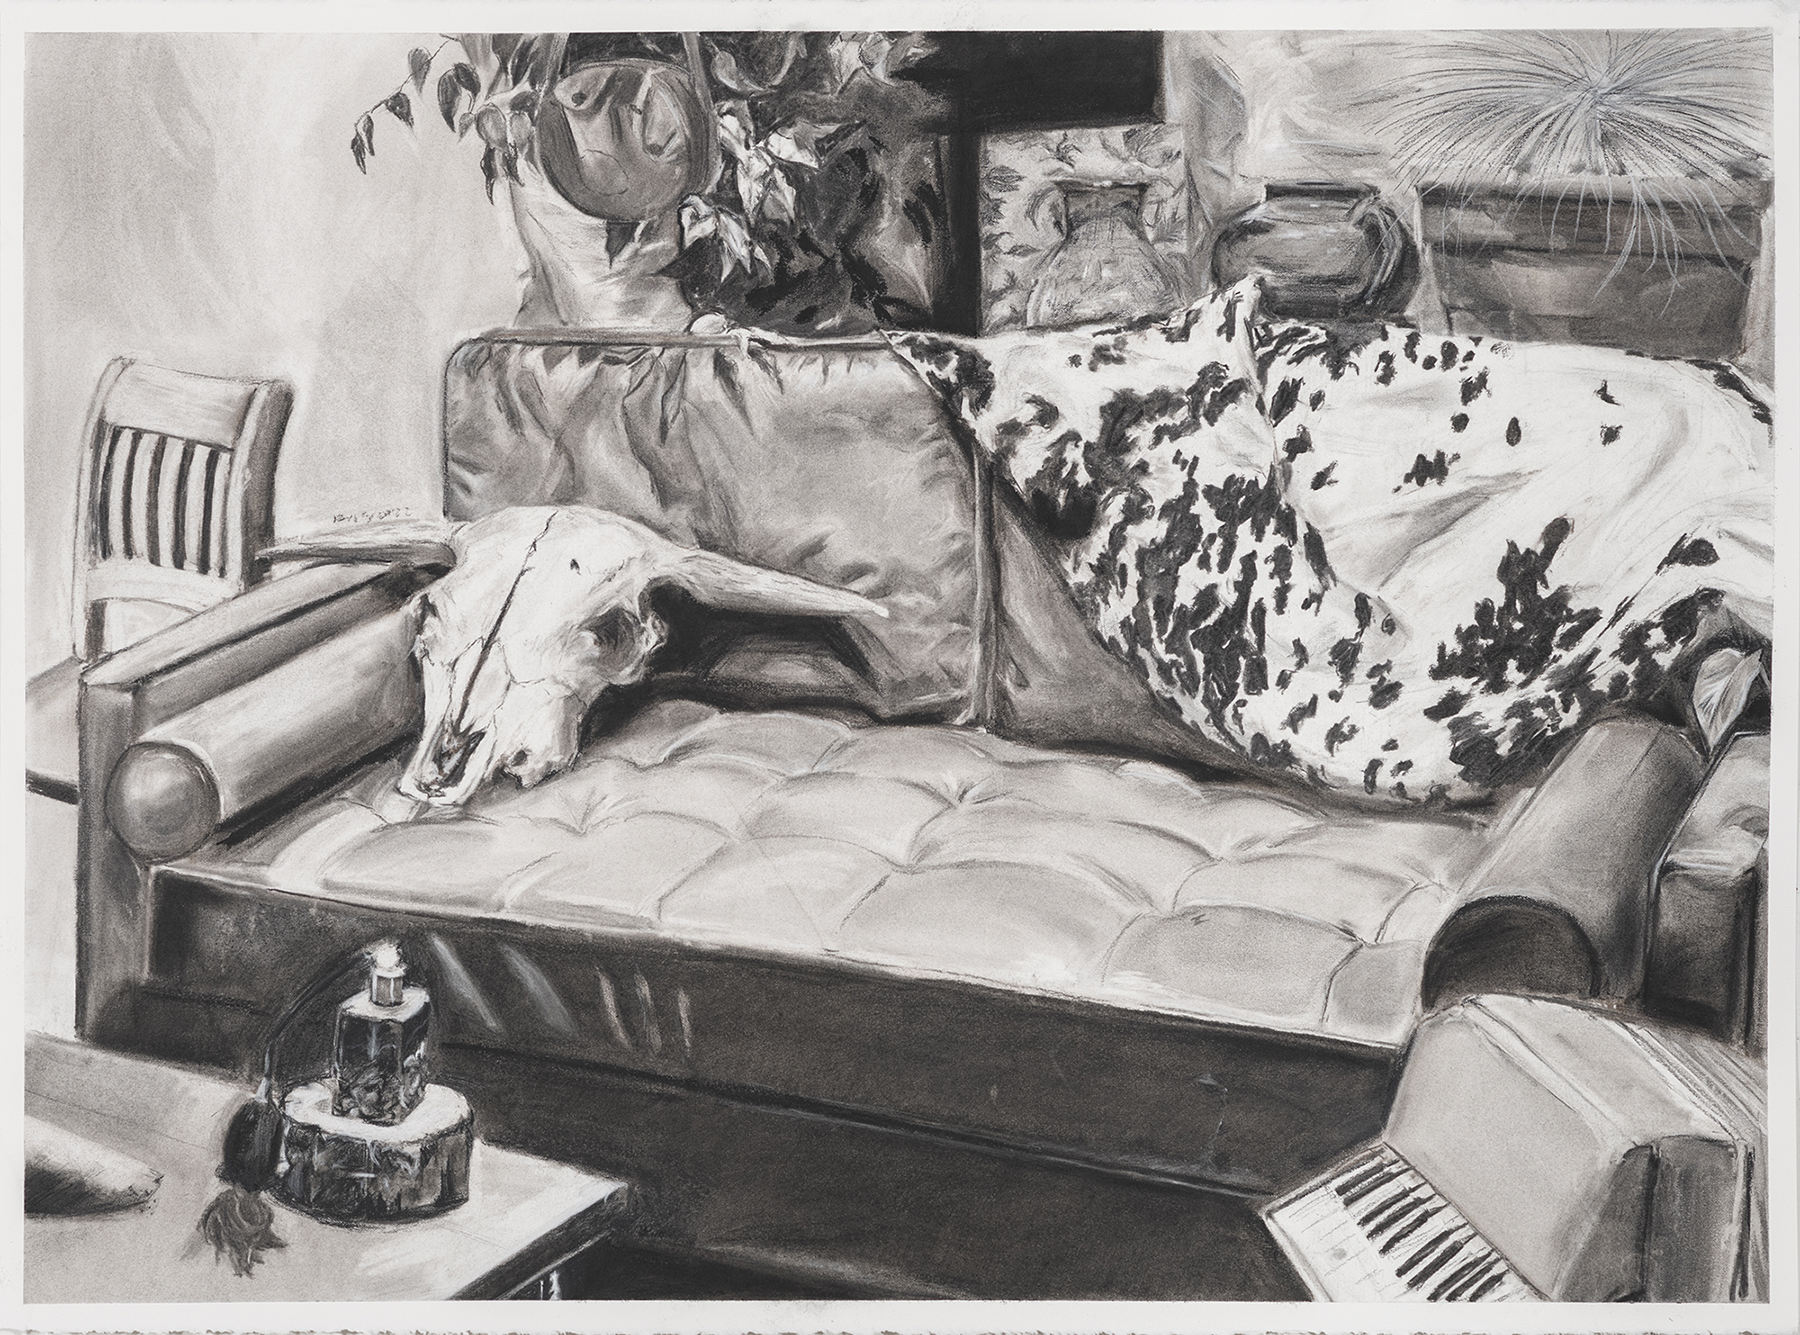 A still-life drawing of a skull head on a couch, surrounded by plants and decor.